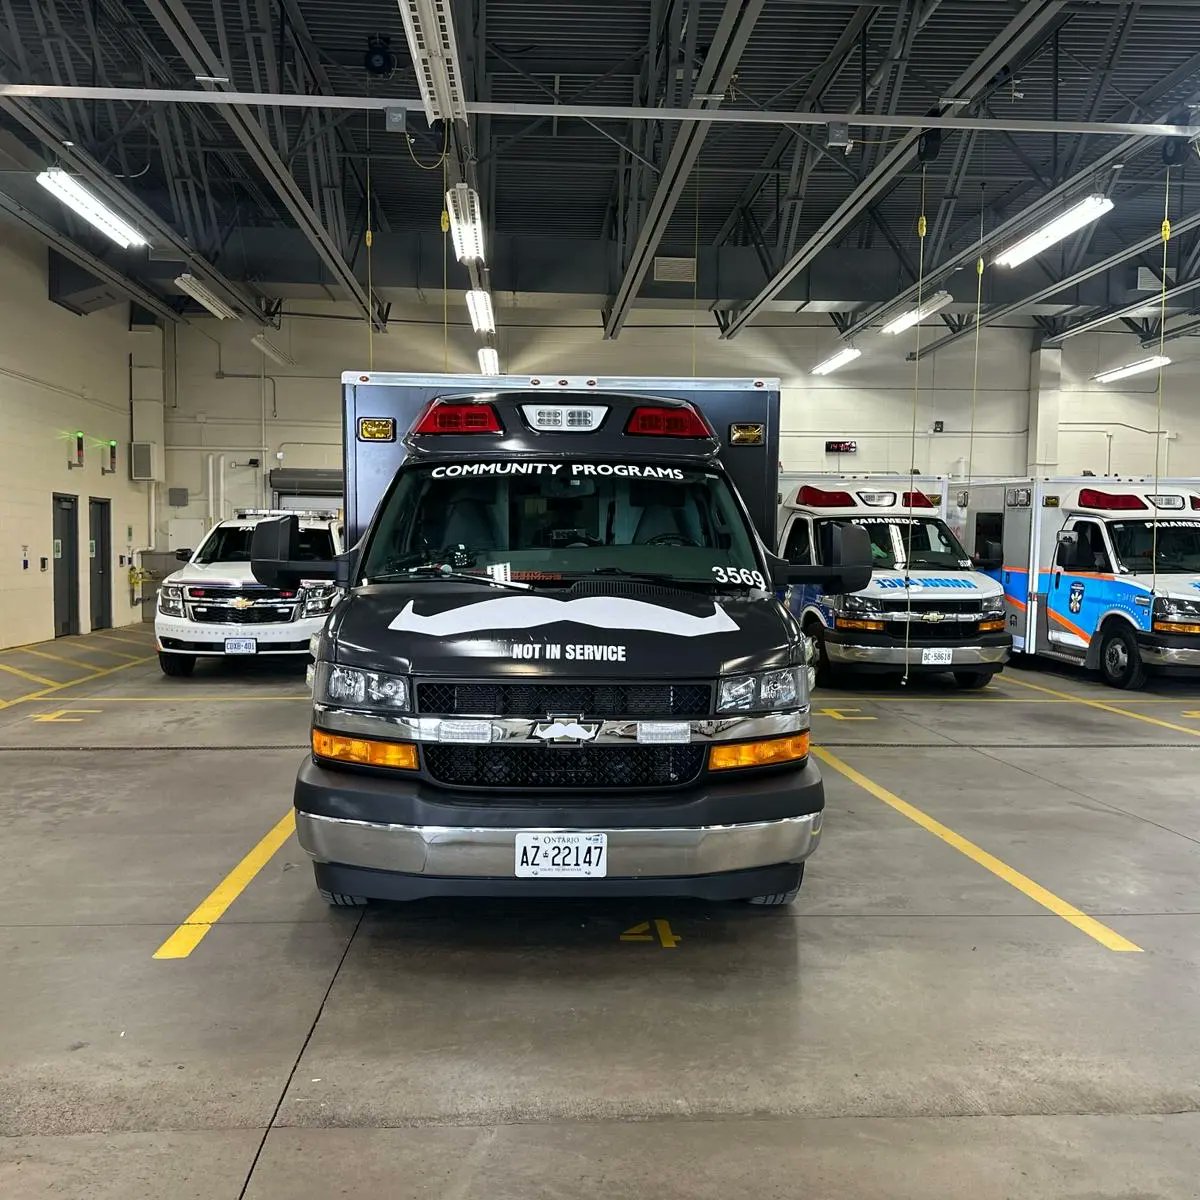 🚑Our ambulance got a makeover for Movember, thanks to our amazing sponsors! Get ready to see it on the streets of Peel Region, all for a great cause. Let's raise funds and awareness for men's health this November!  #ThankYouSponsors #ParamedicService #MensHealth #Movember2023